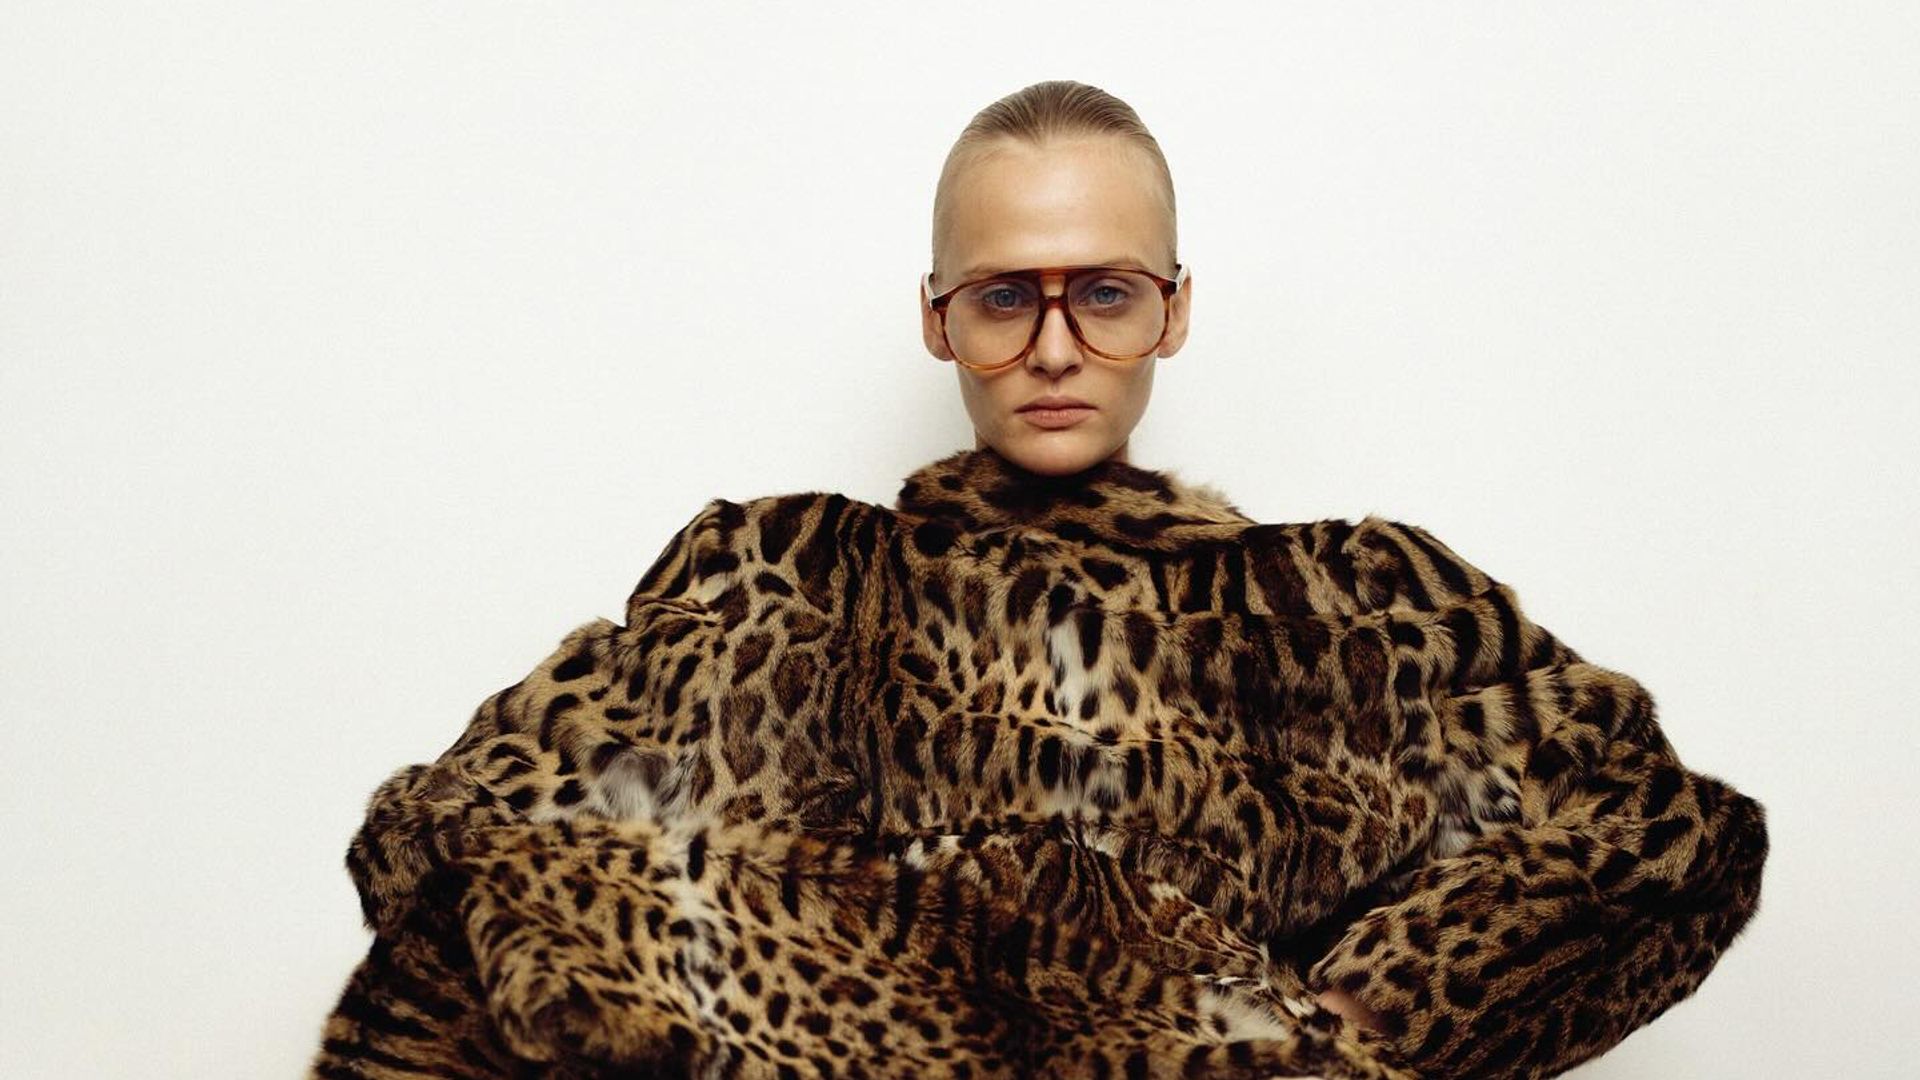 Luxury upcycled fur brand Nereja post an image of a model sitting down in a full leopard print outfit